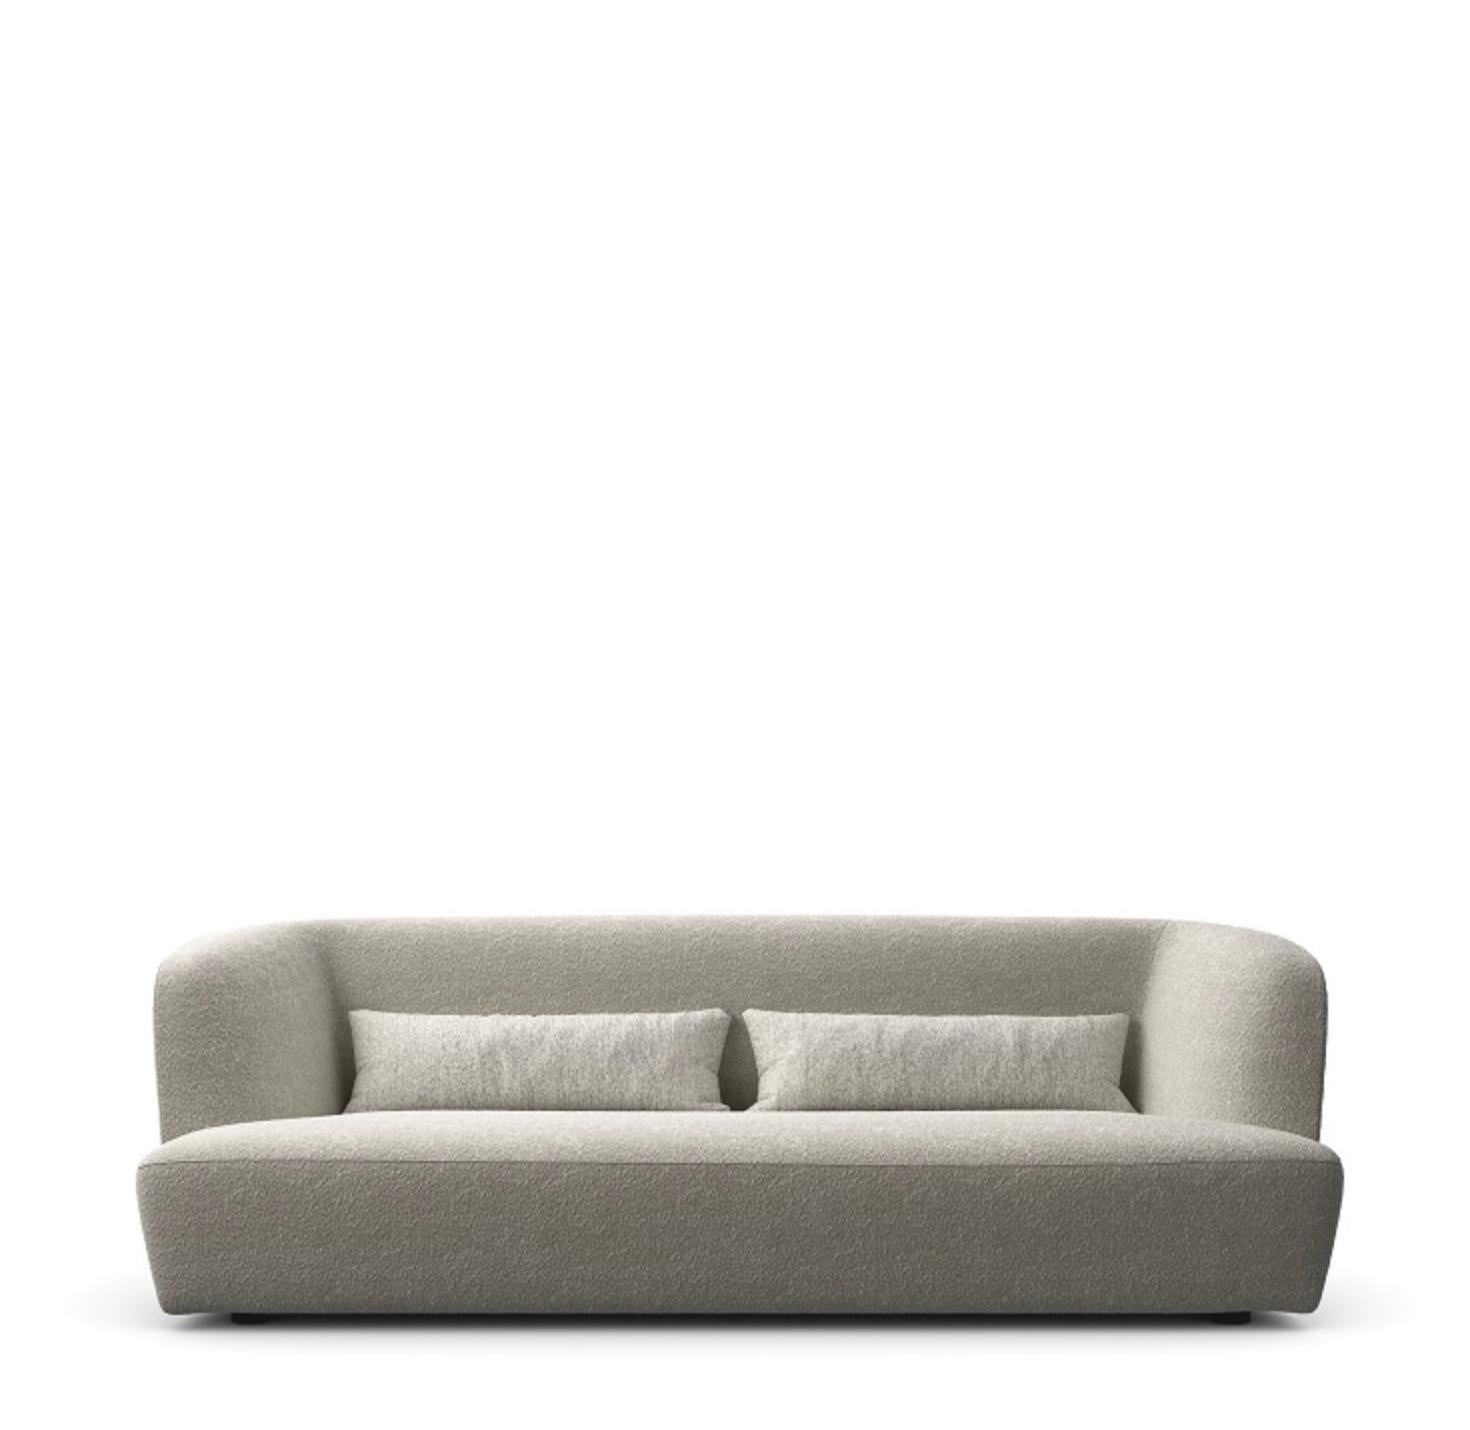 Lievore + Altherr Désile Park 'Davos' Sofa 270 for Verzelloni, Italy. New, current production.

Davos curved sofa has a rounded line and an elegant and rigorous design, it offers high comfort thanks to the height of its backrest. Davos range